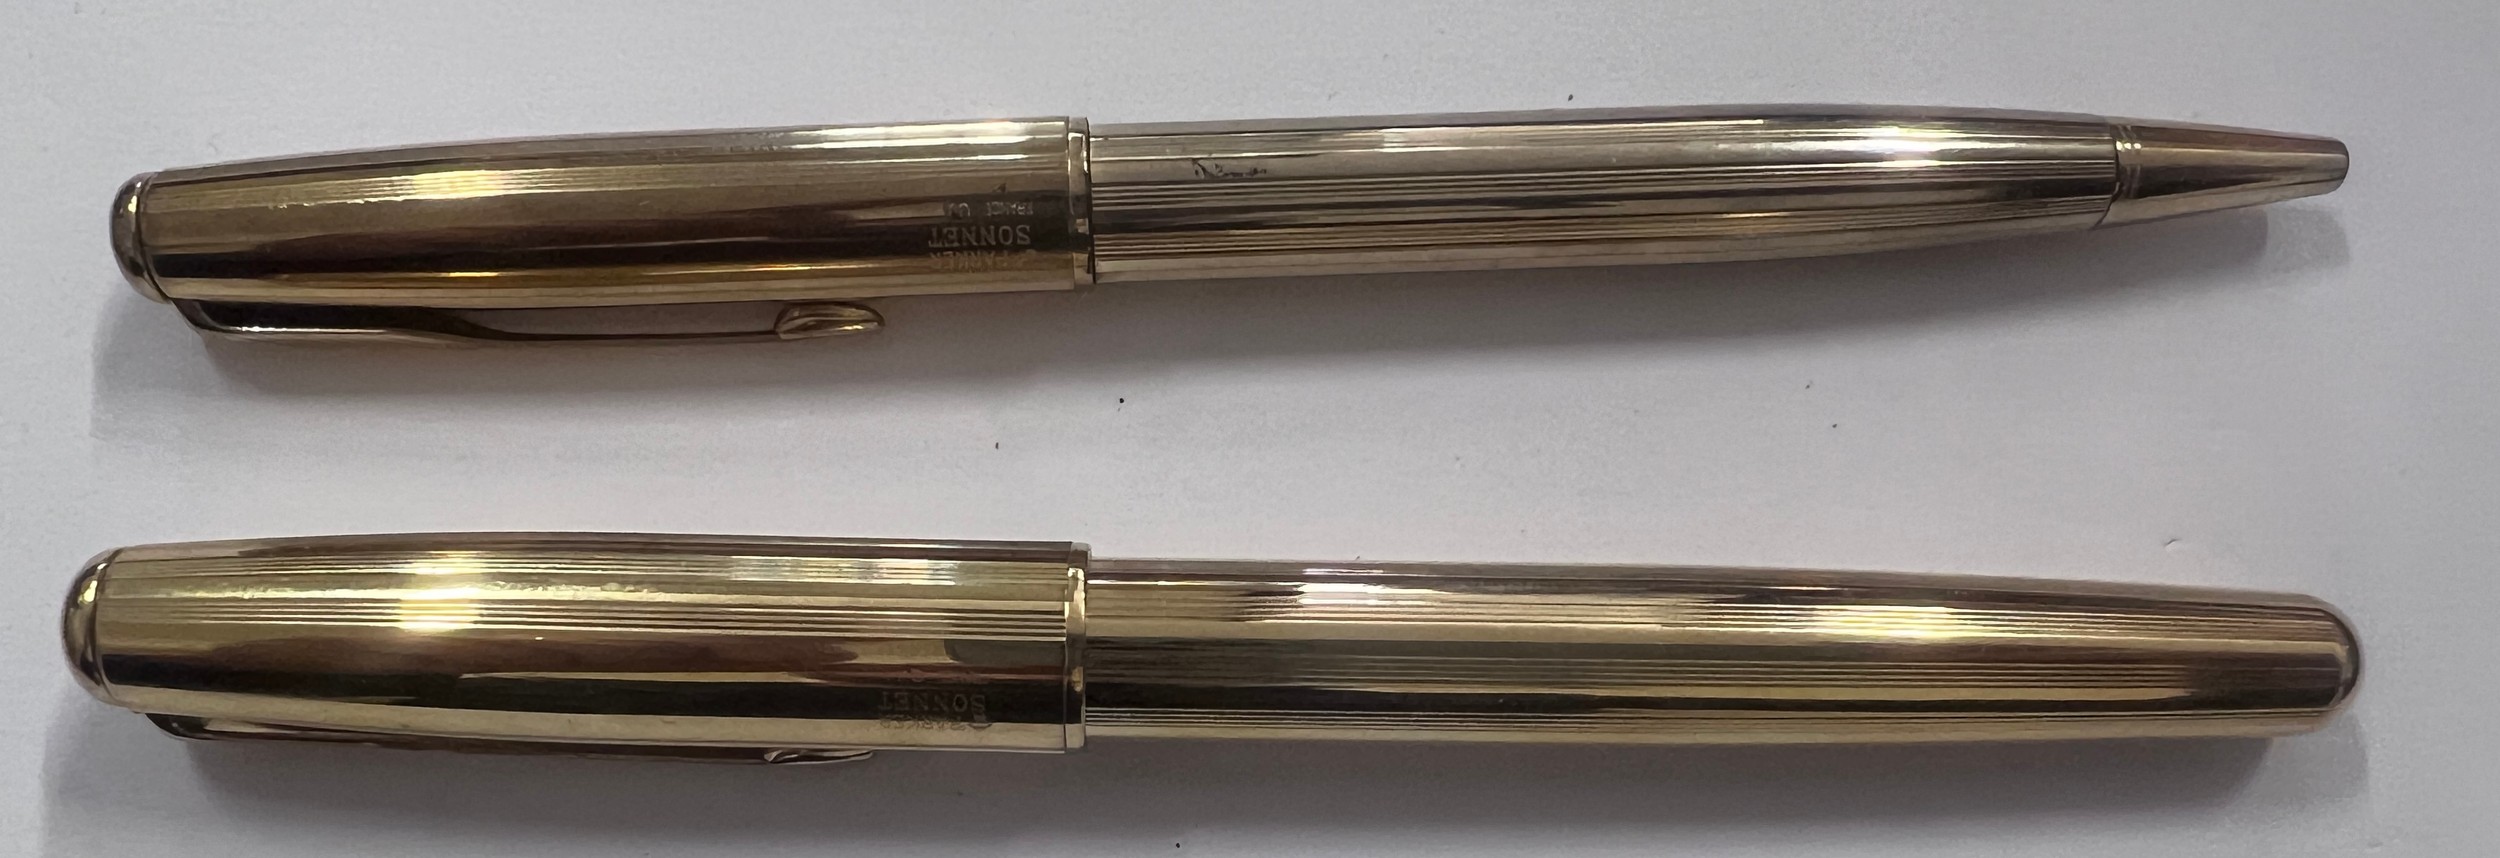 Two gold plated Parker Sonnet pens to include a fountain pen and biro.